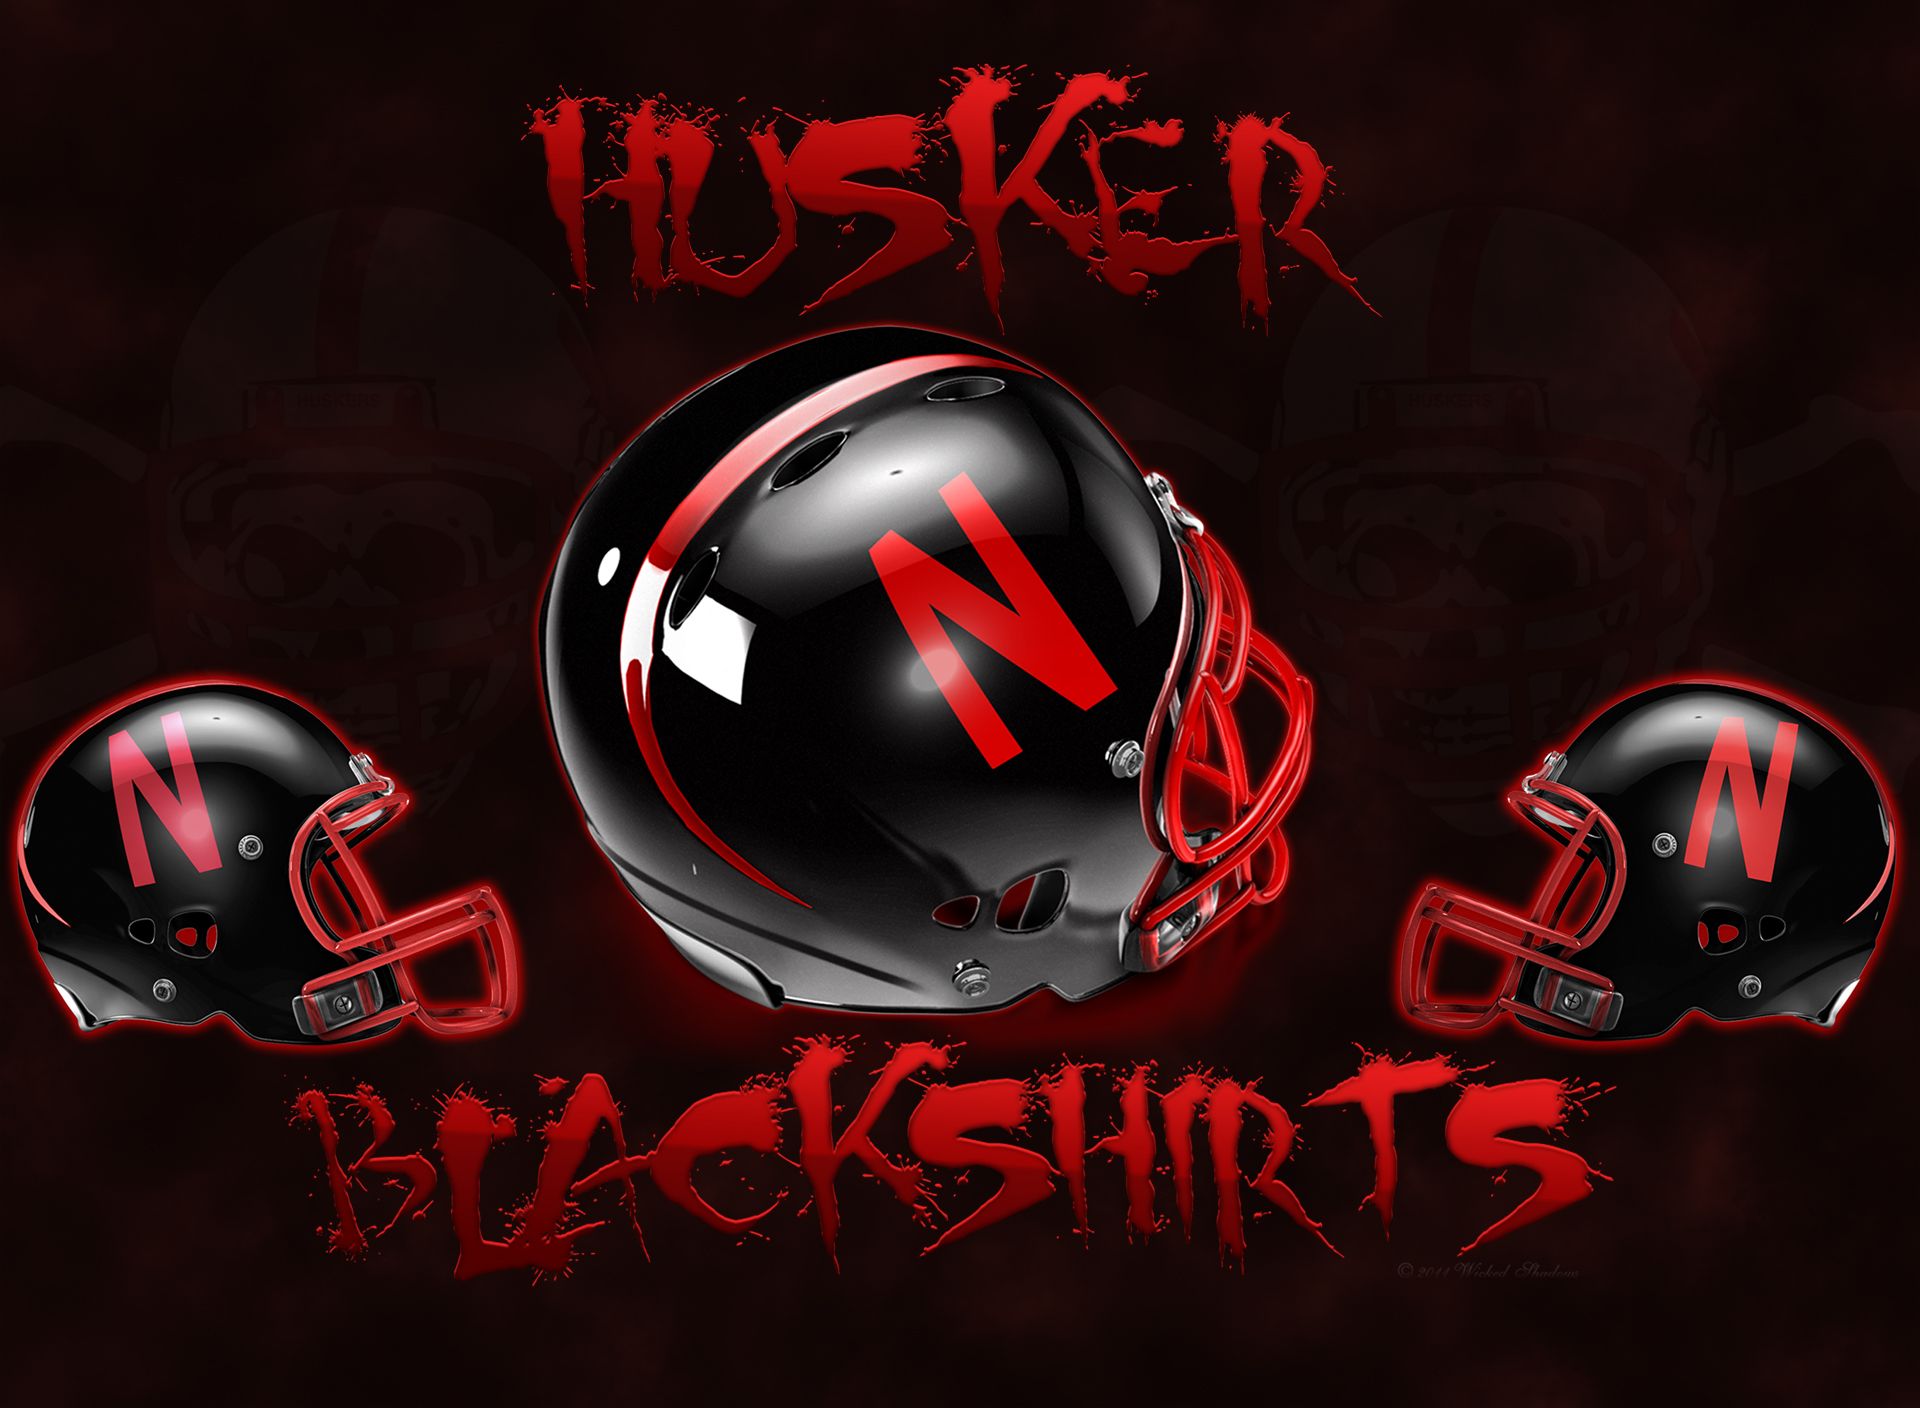 Wallpapers By Wicked Shadows: Husker Wallpapers